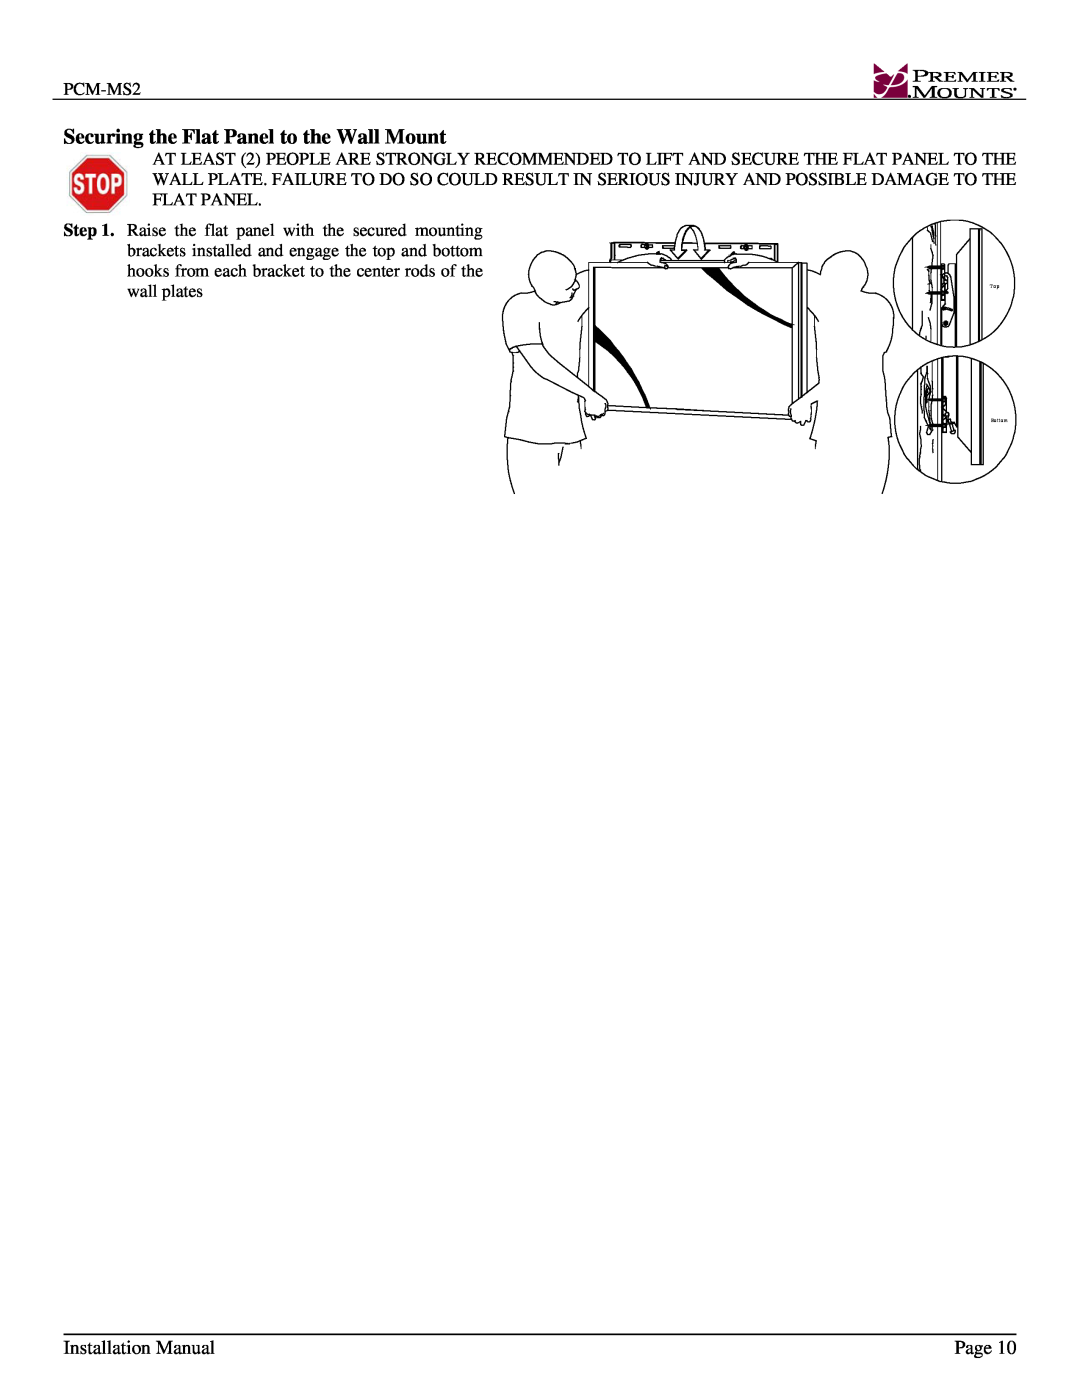 Premier Mounts PCM-MS2 installation instructions Installation Manual, Page 